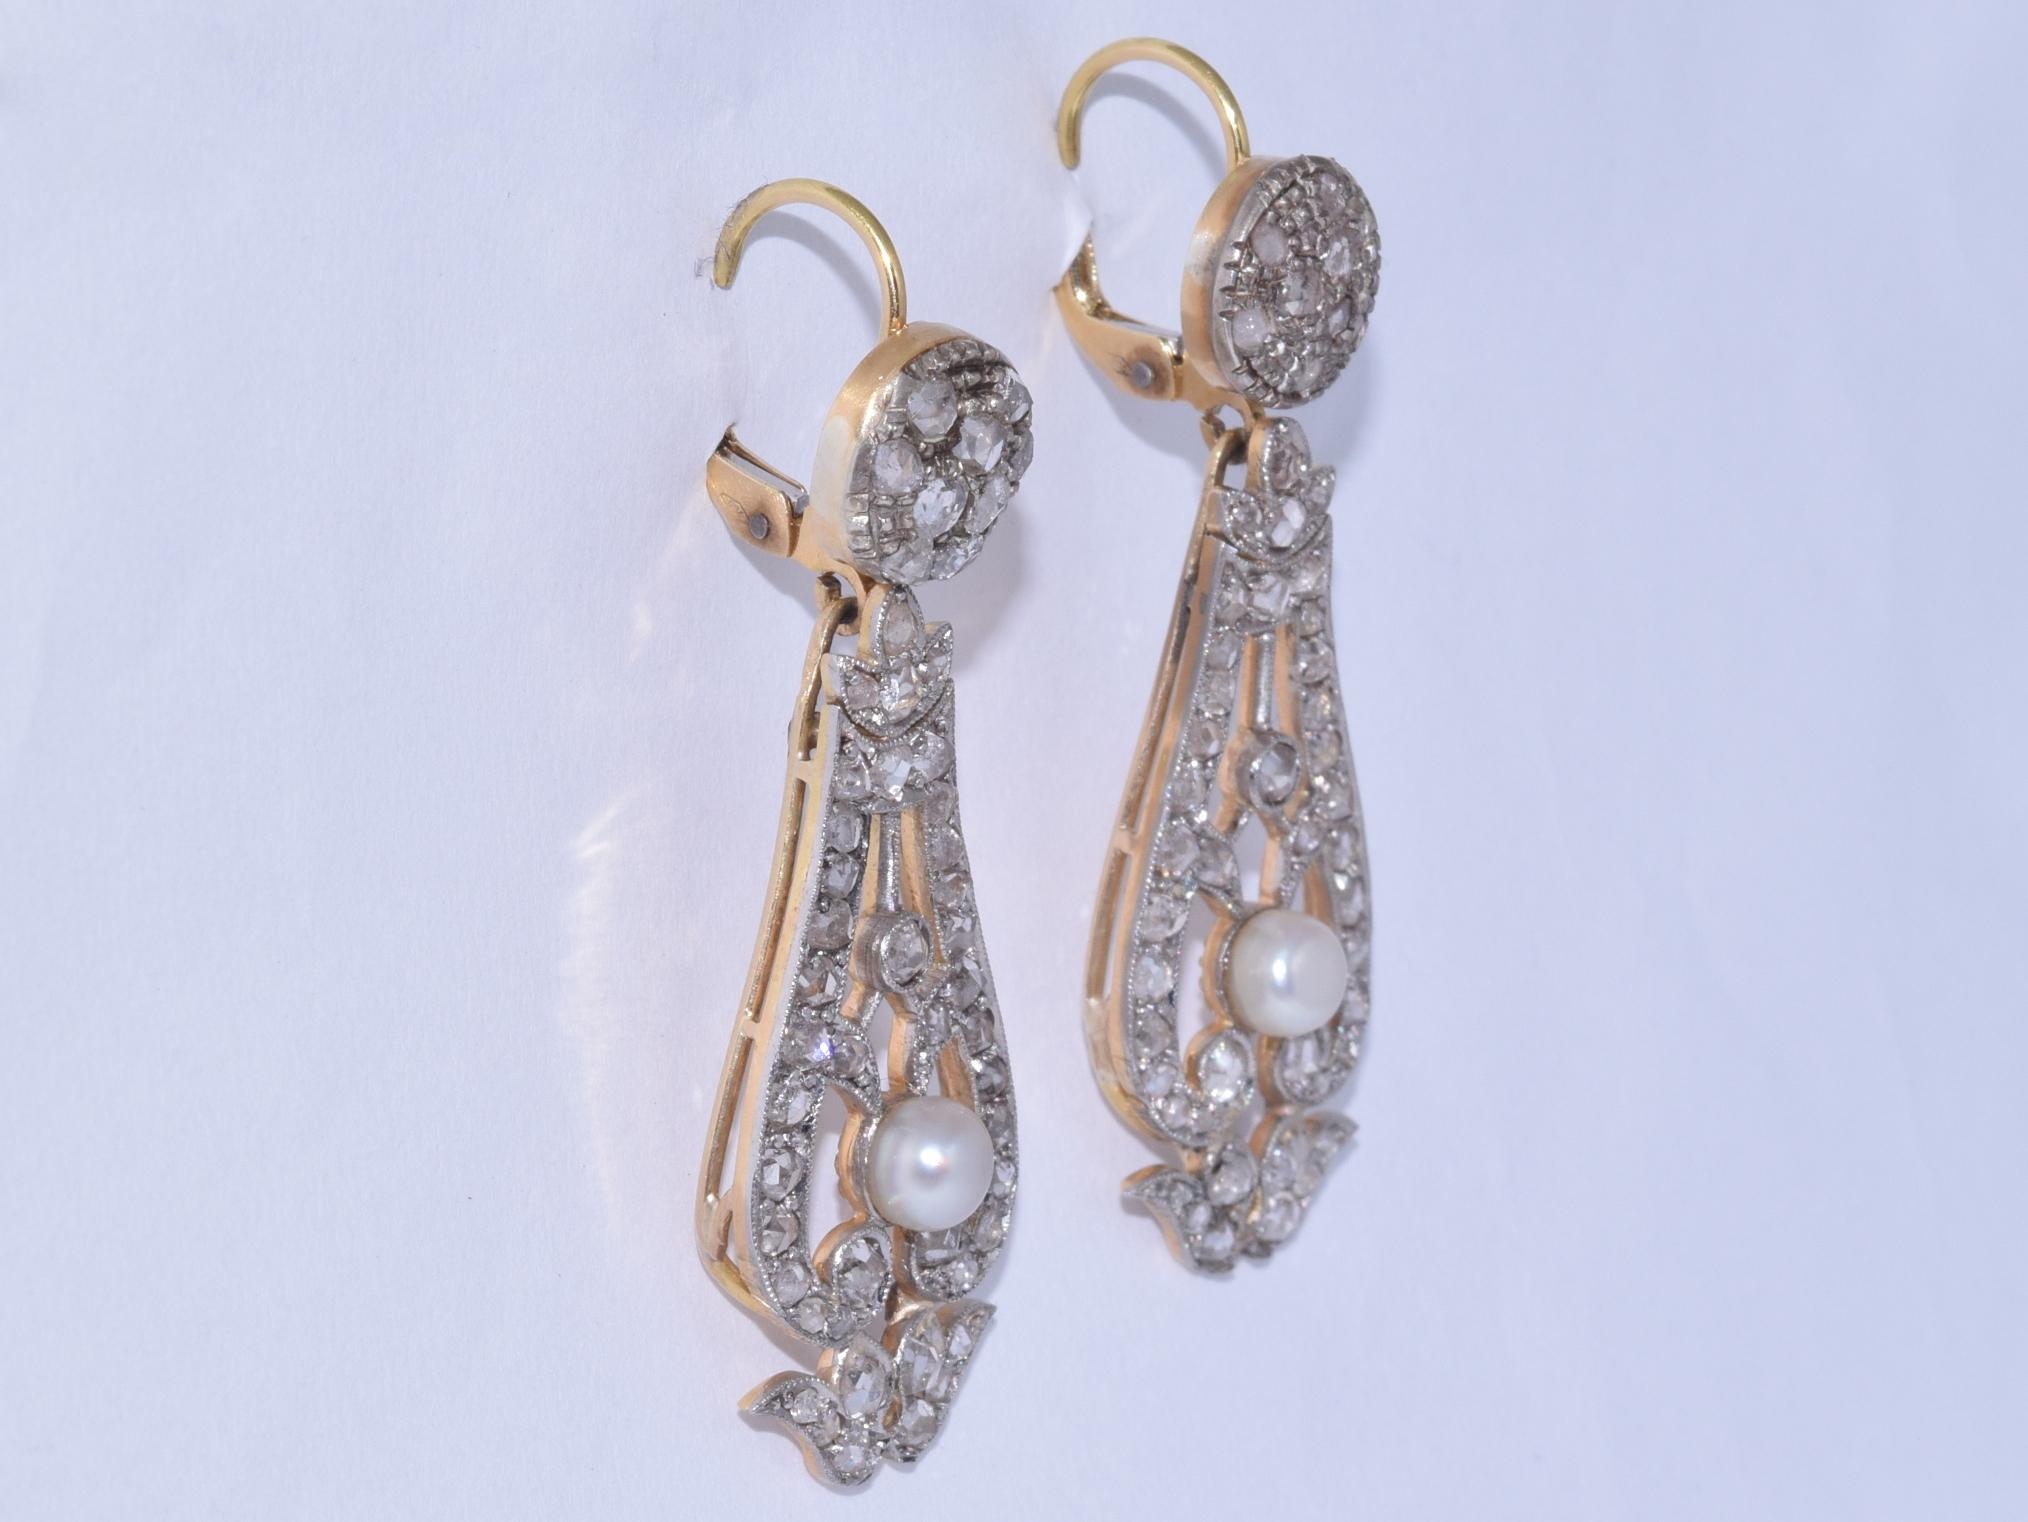 Lovely antique rose cut diamond & pearl pendant earrings featuring approximately 1.75ct of rose cut diamonds.

Details:
Rose Cut Diamonds appx. 1.75cts, appx. K-L-M/SI-I.
Pearls appx. 4.8-5mm.
Platinum topped Yellow Gold Mountings.
Length: